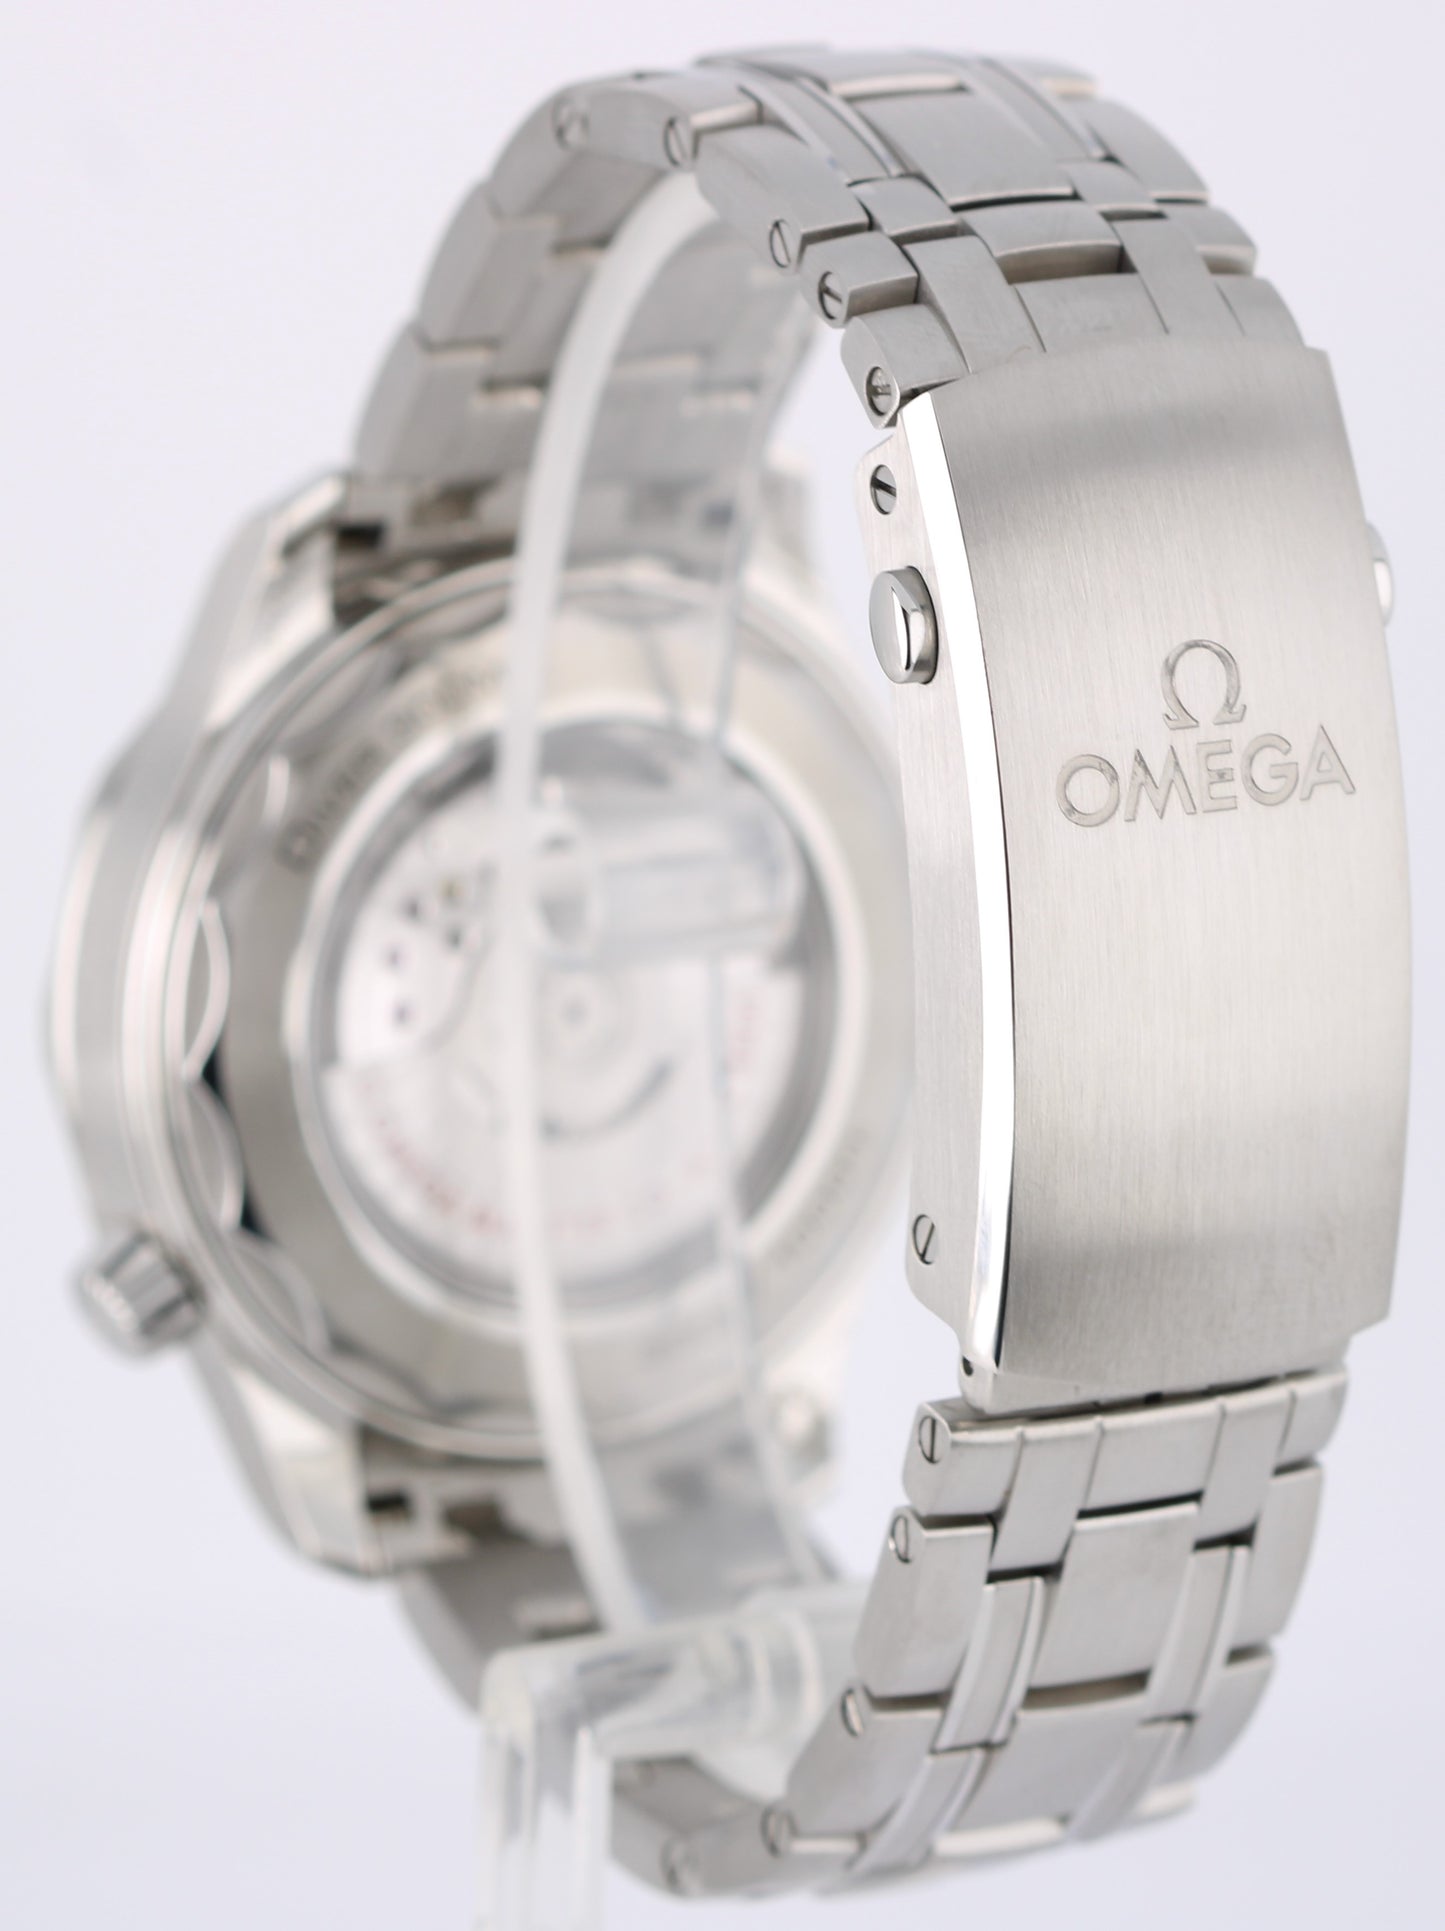 Feb. 2023 PAPERS Omega Seamaster Diver Grey 42mm 210.30.42.20.06.001 Watch BOX